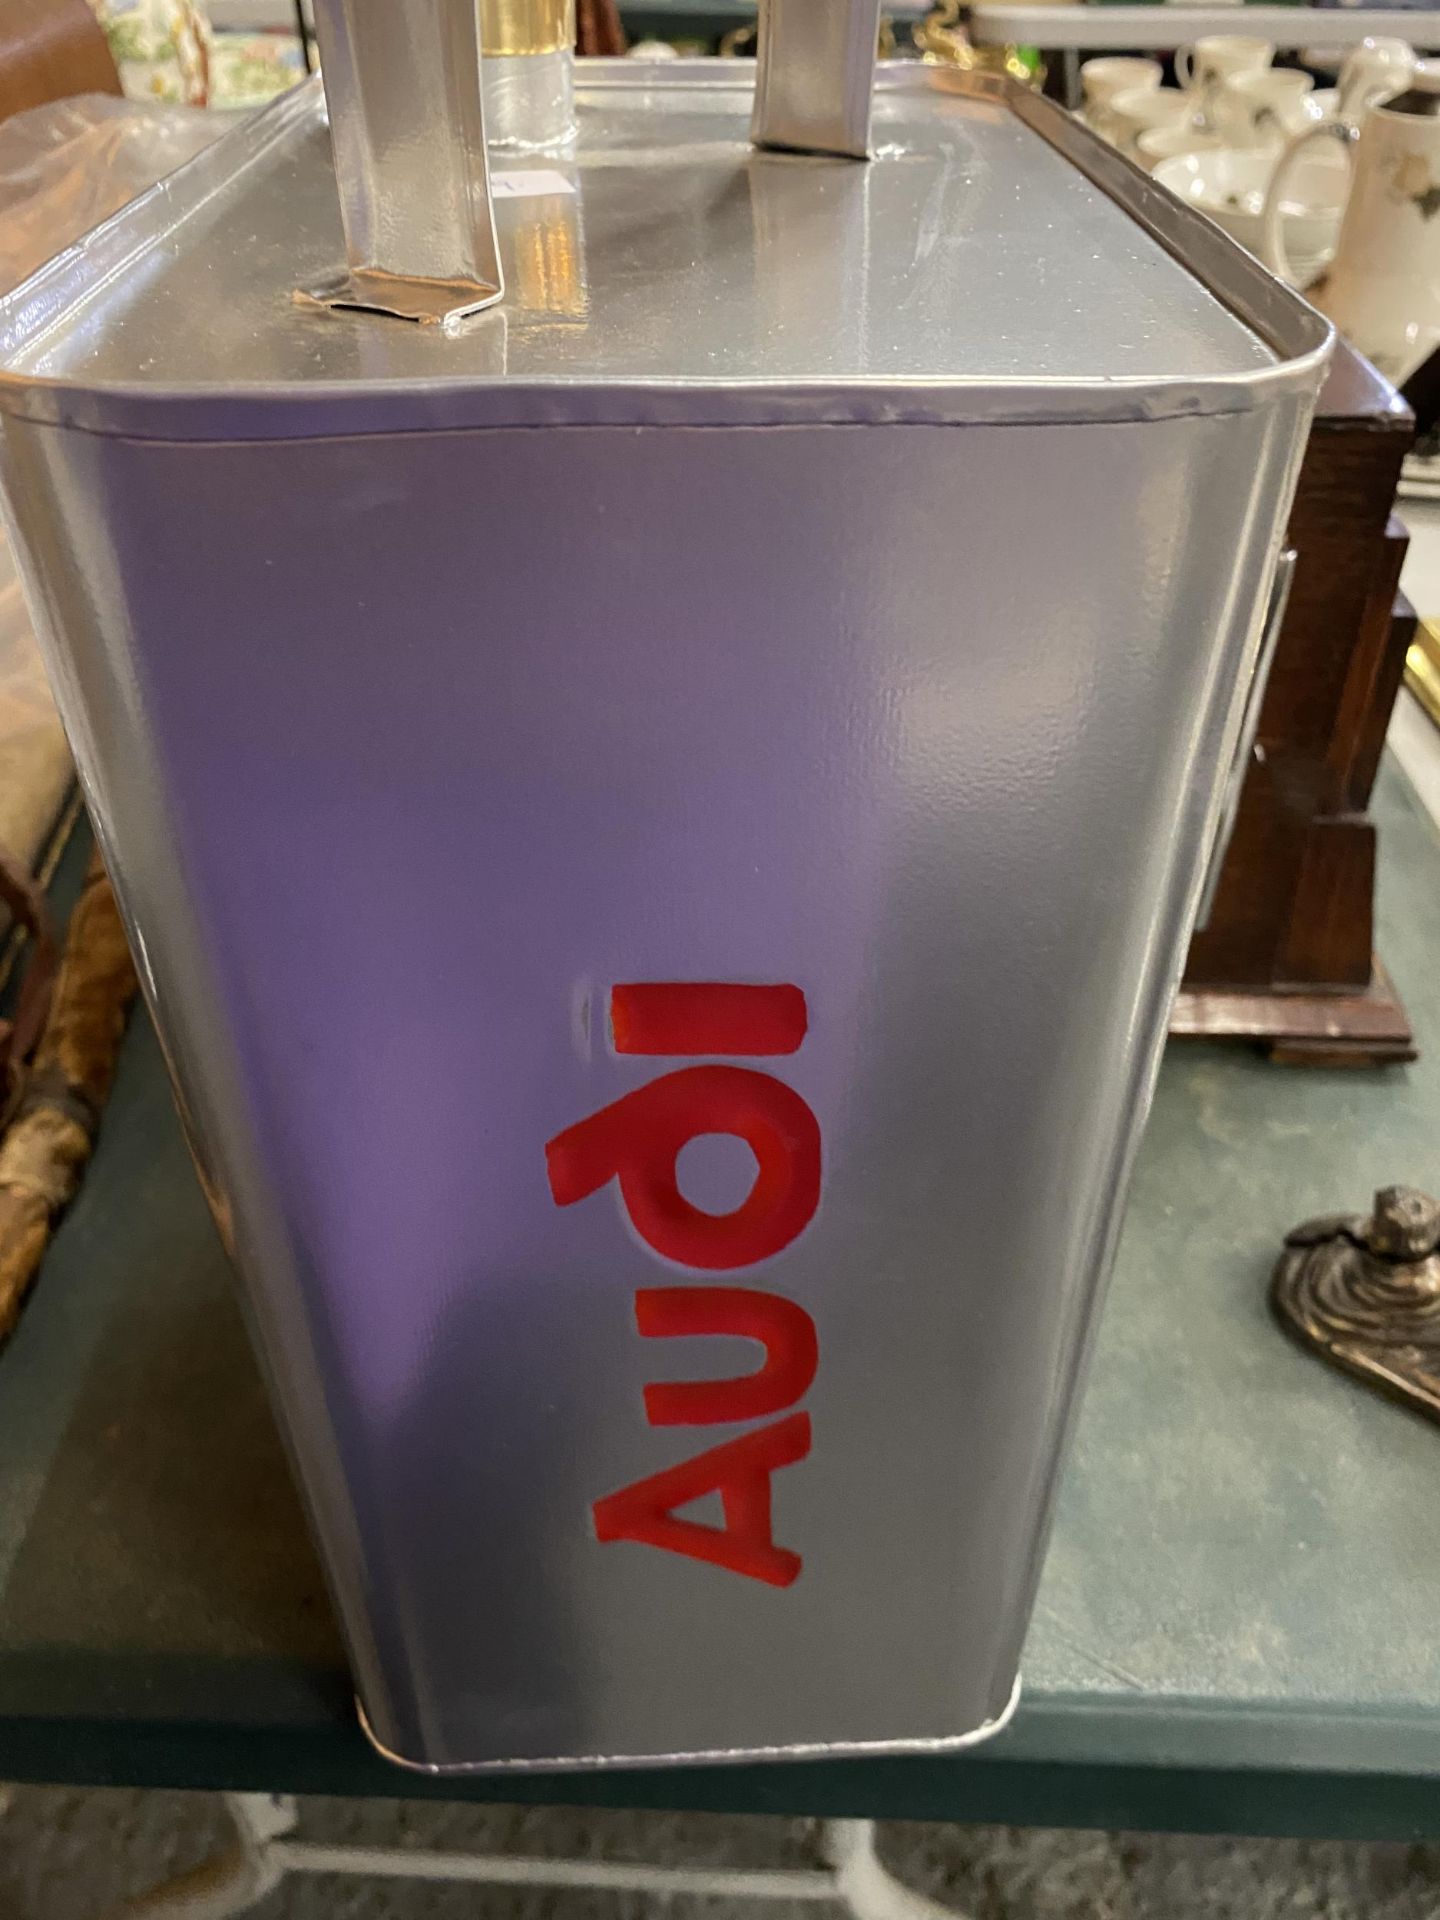 AN AUDI PETROL CAN - Image 2 of 3